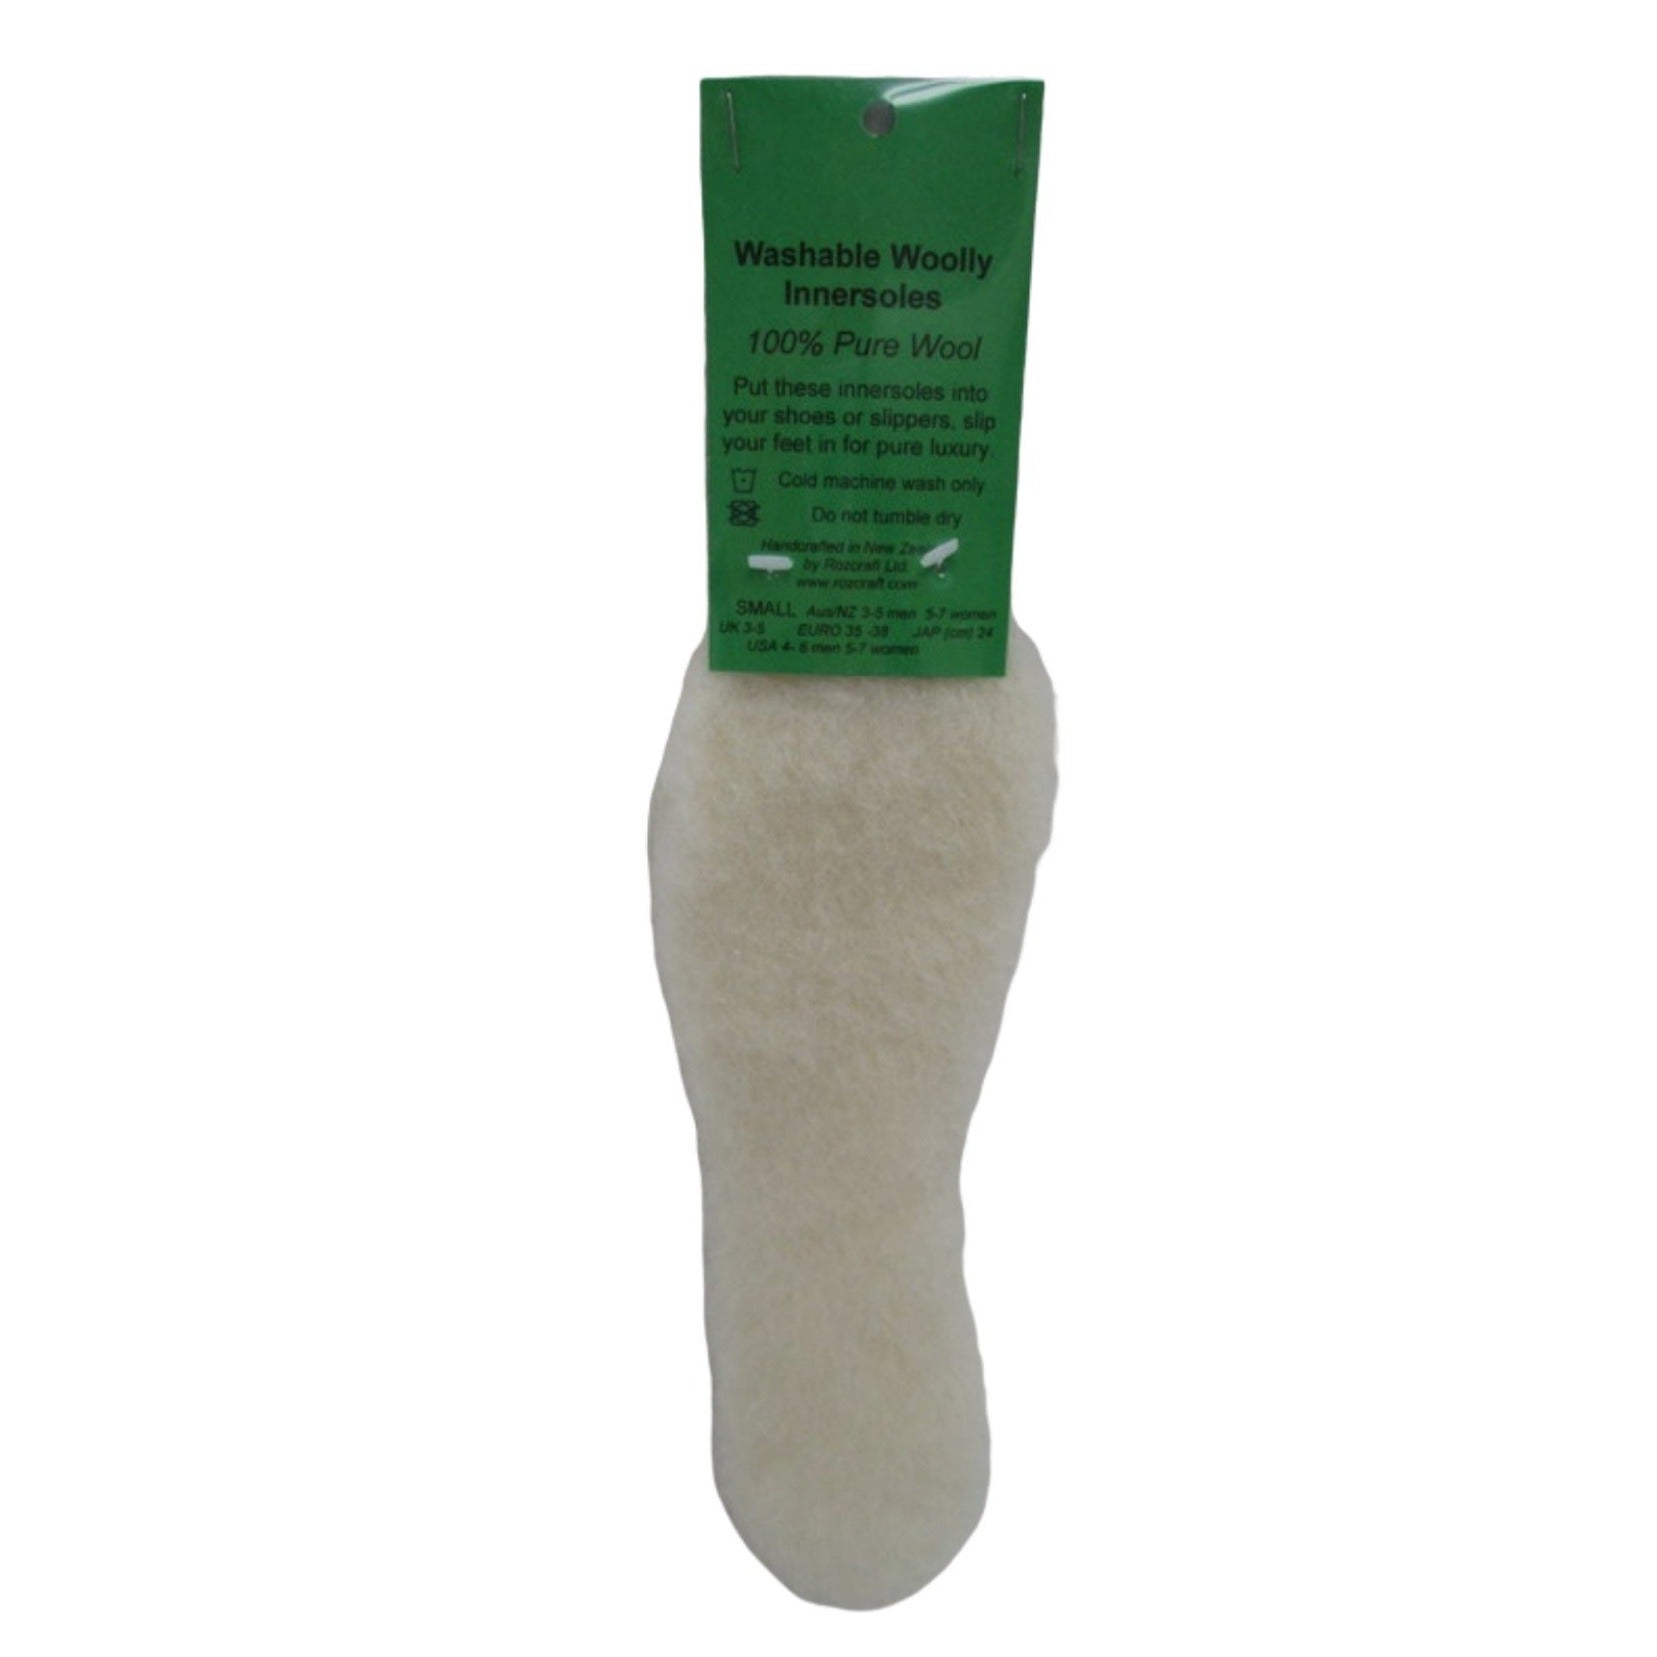 Washable wool innersoles